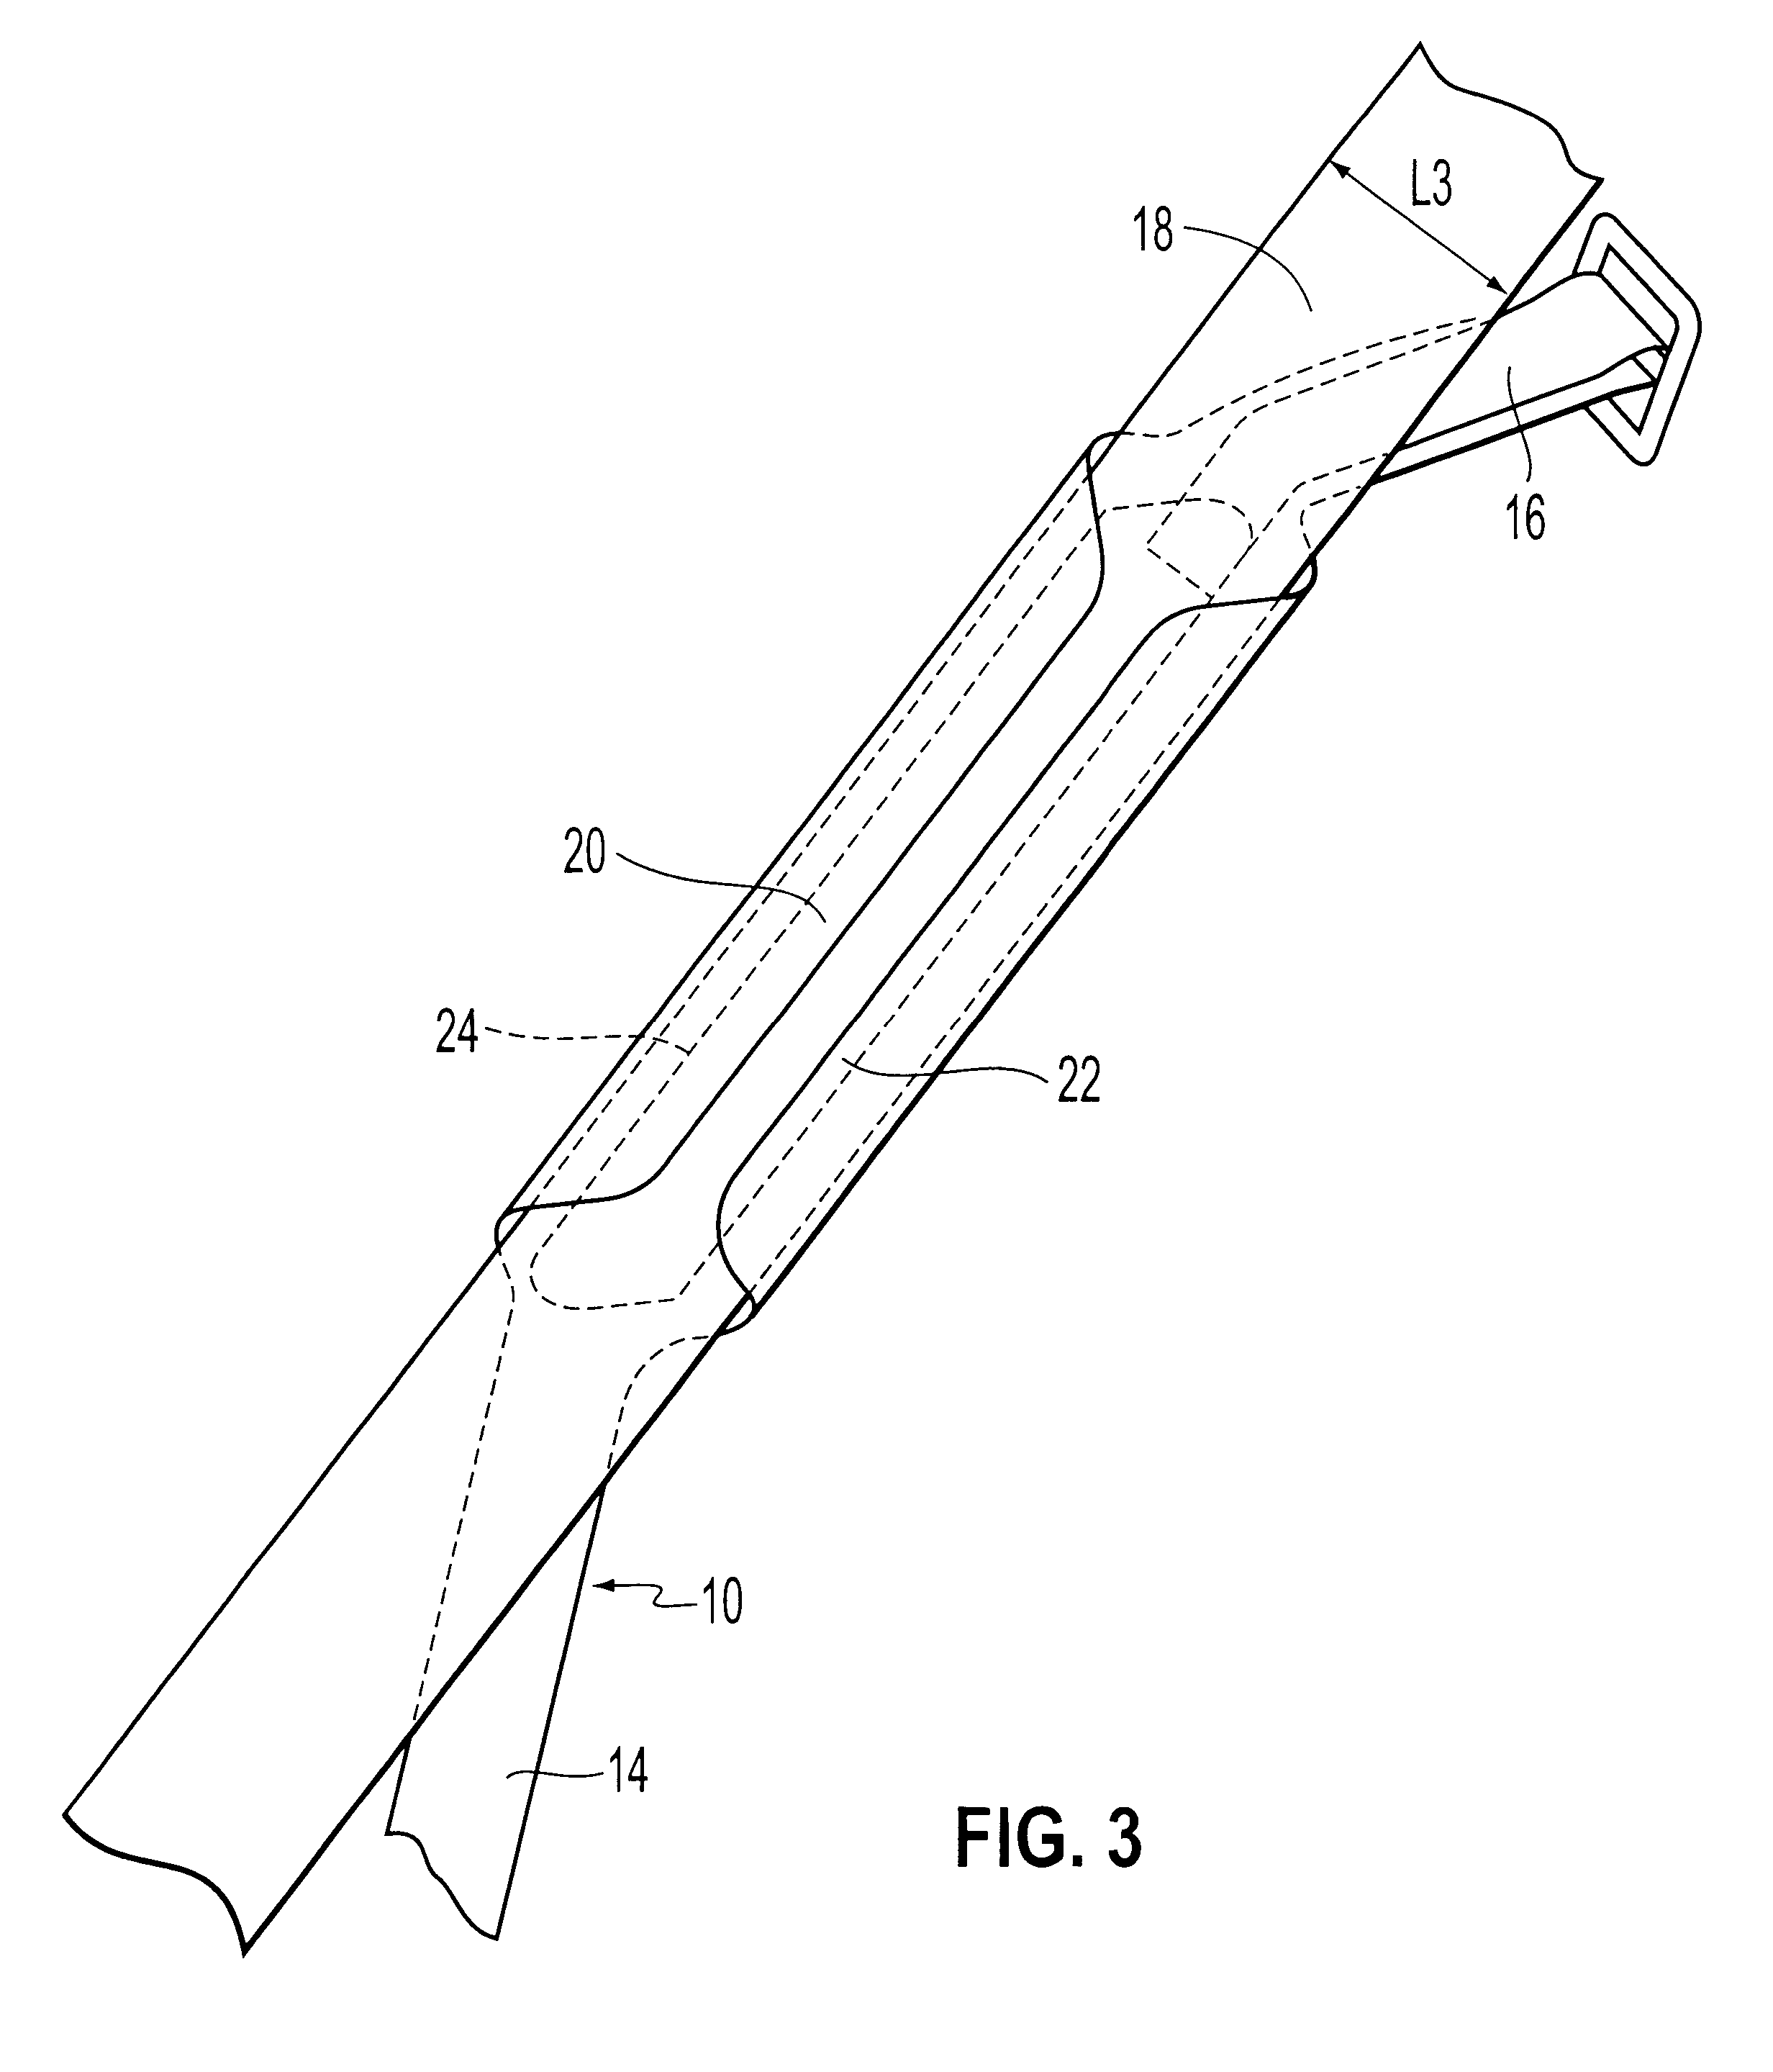 Manufacturing process of a wear resistant attachment device for a sit harness or roping harness, and attachement device with a strap obtained according to the process